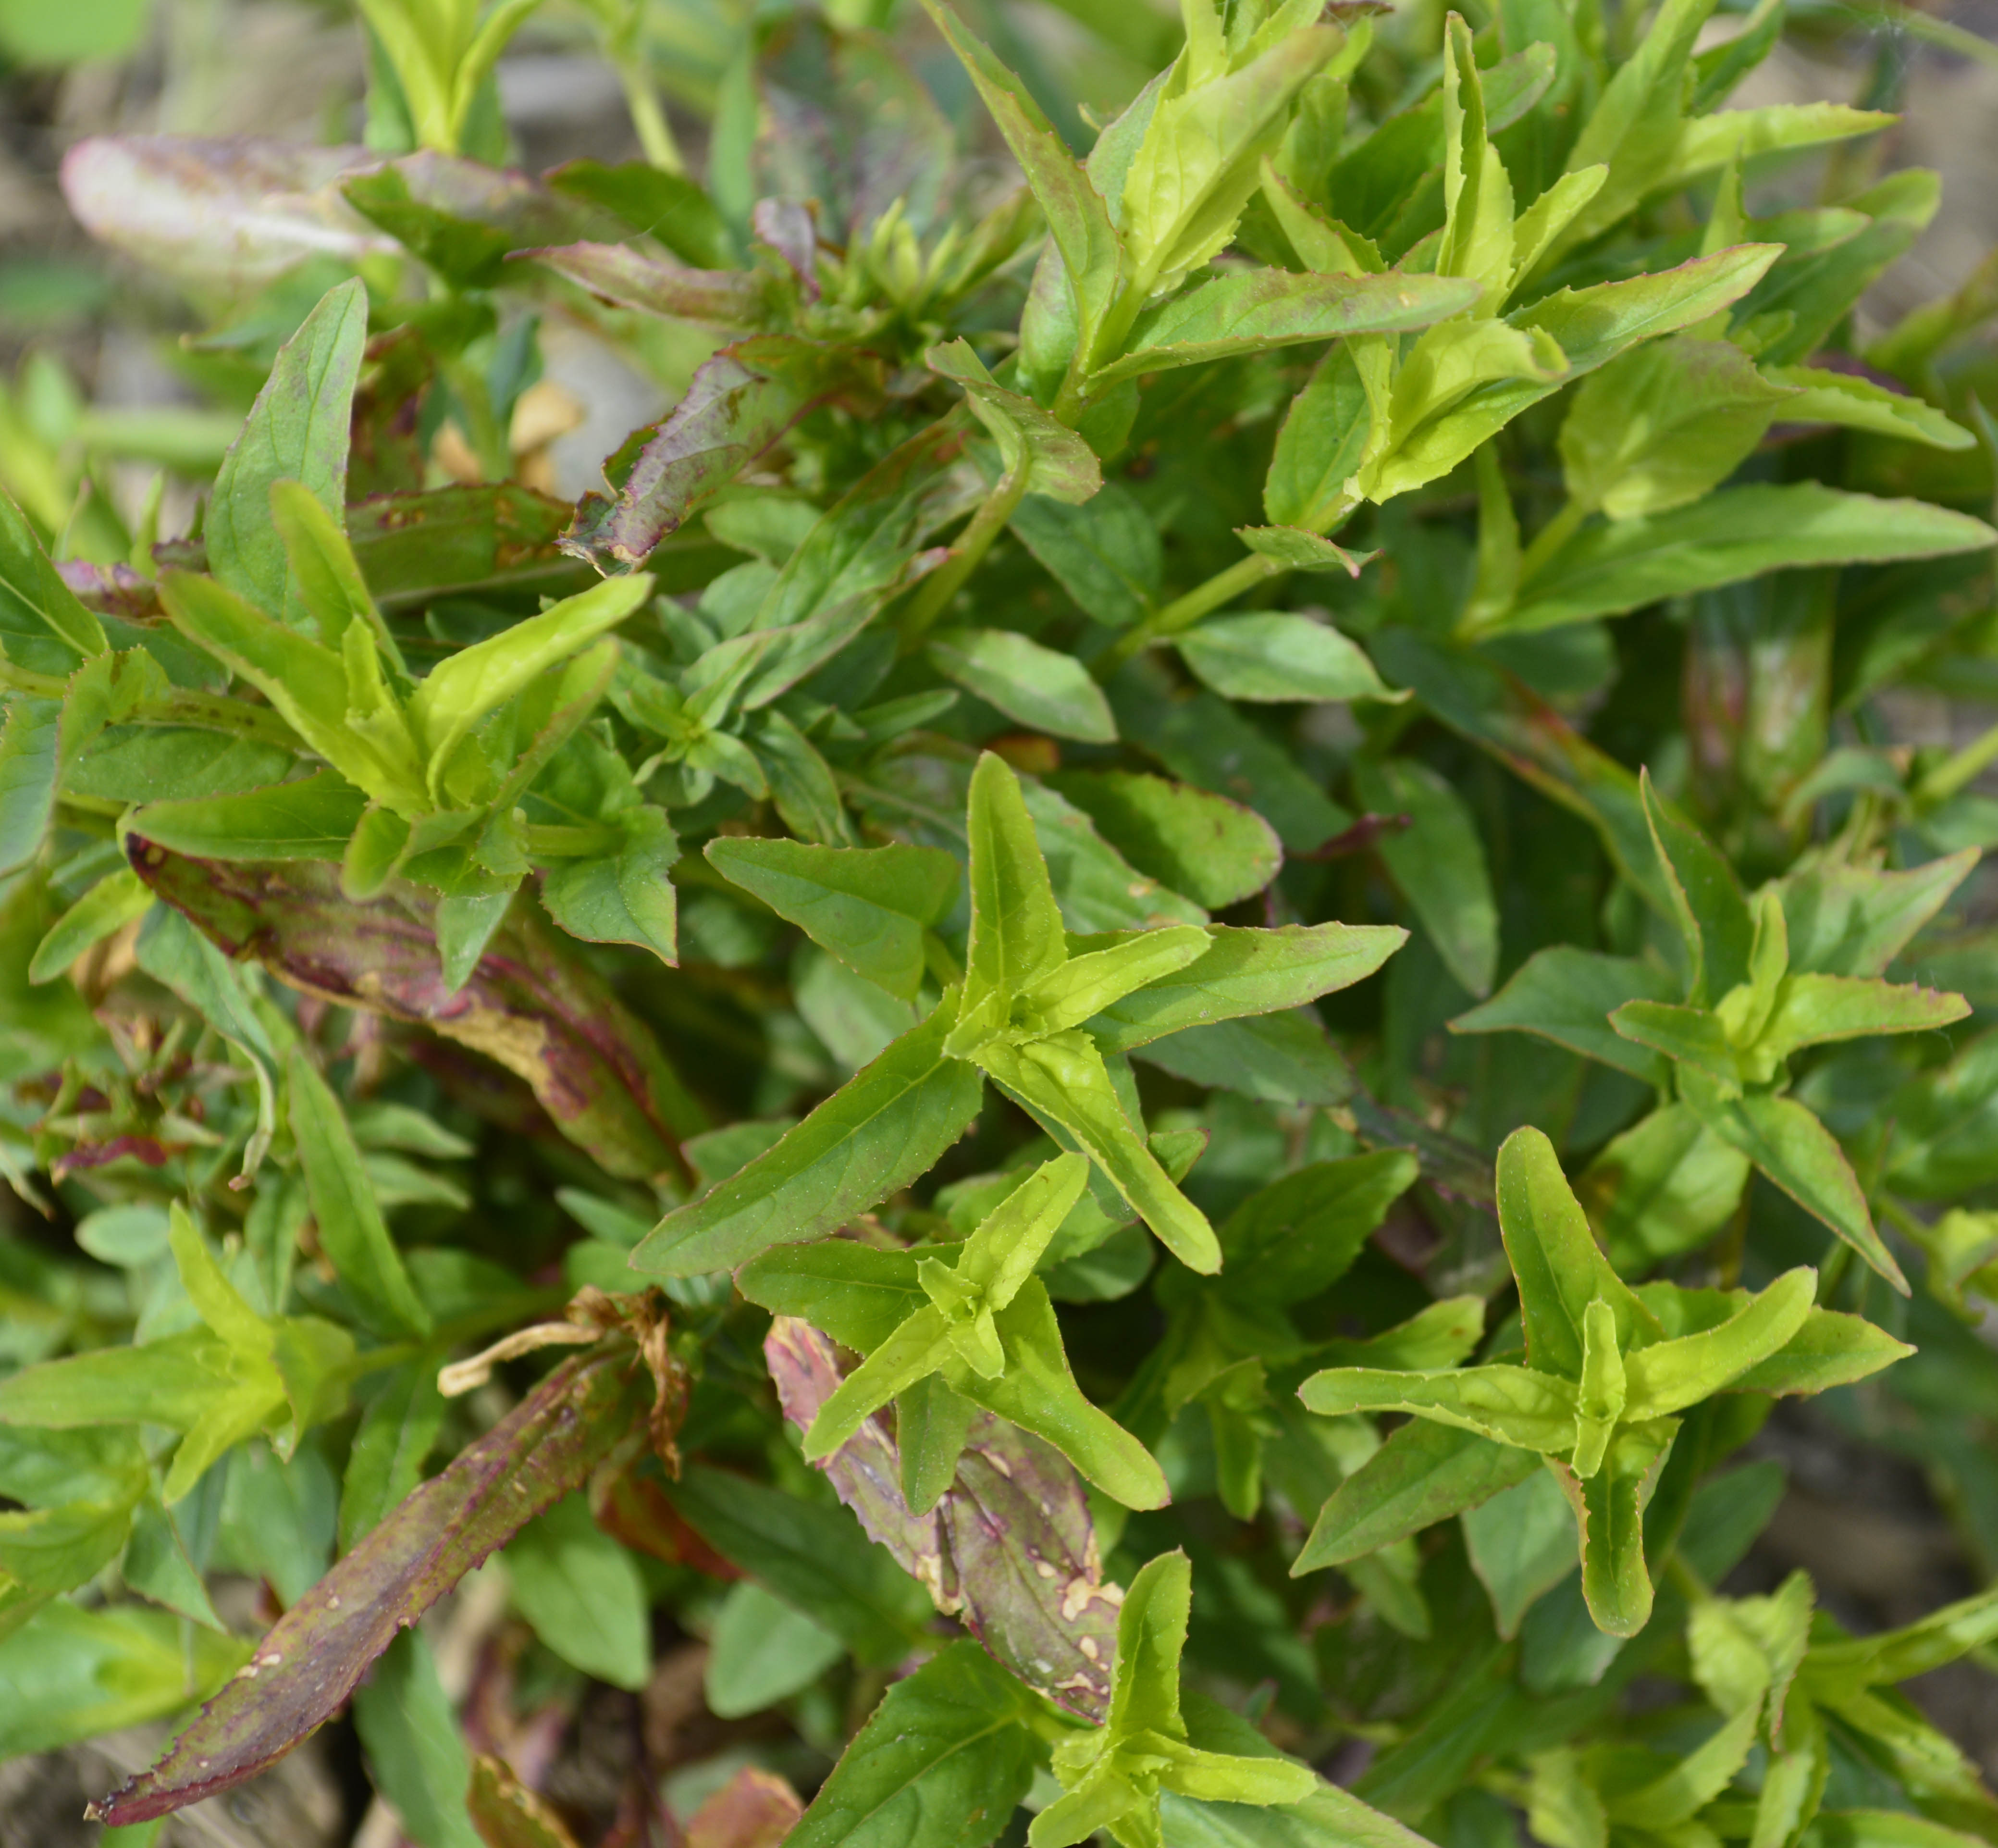 A close-up of opposite, lance- shaped leaves that are discoloured red from an earlier application of glyphosate